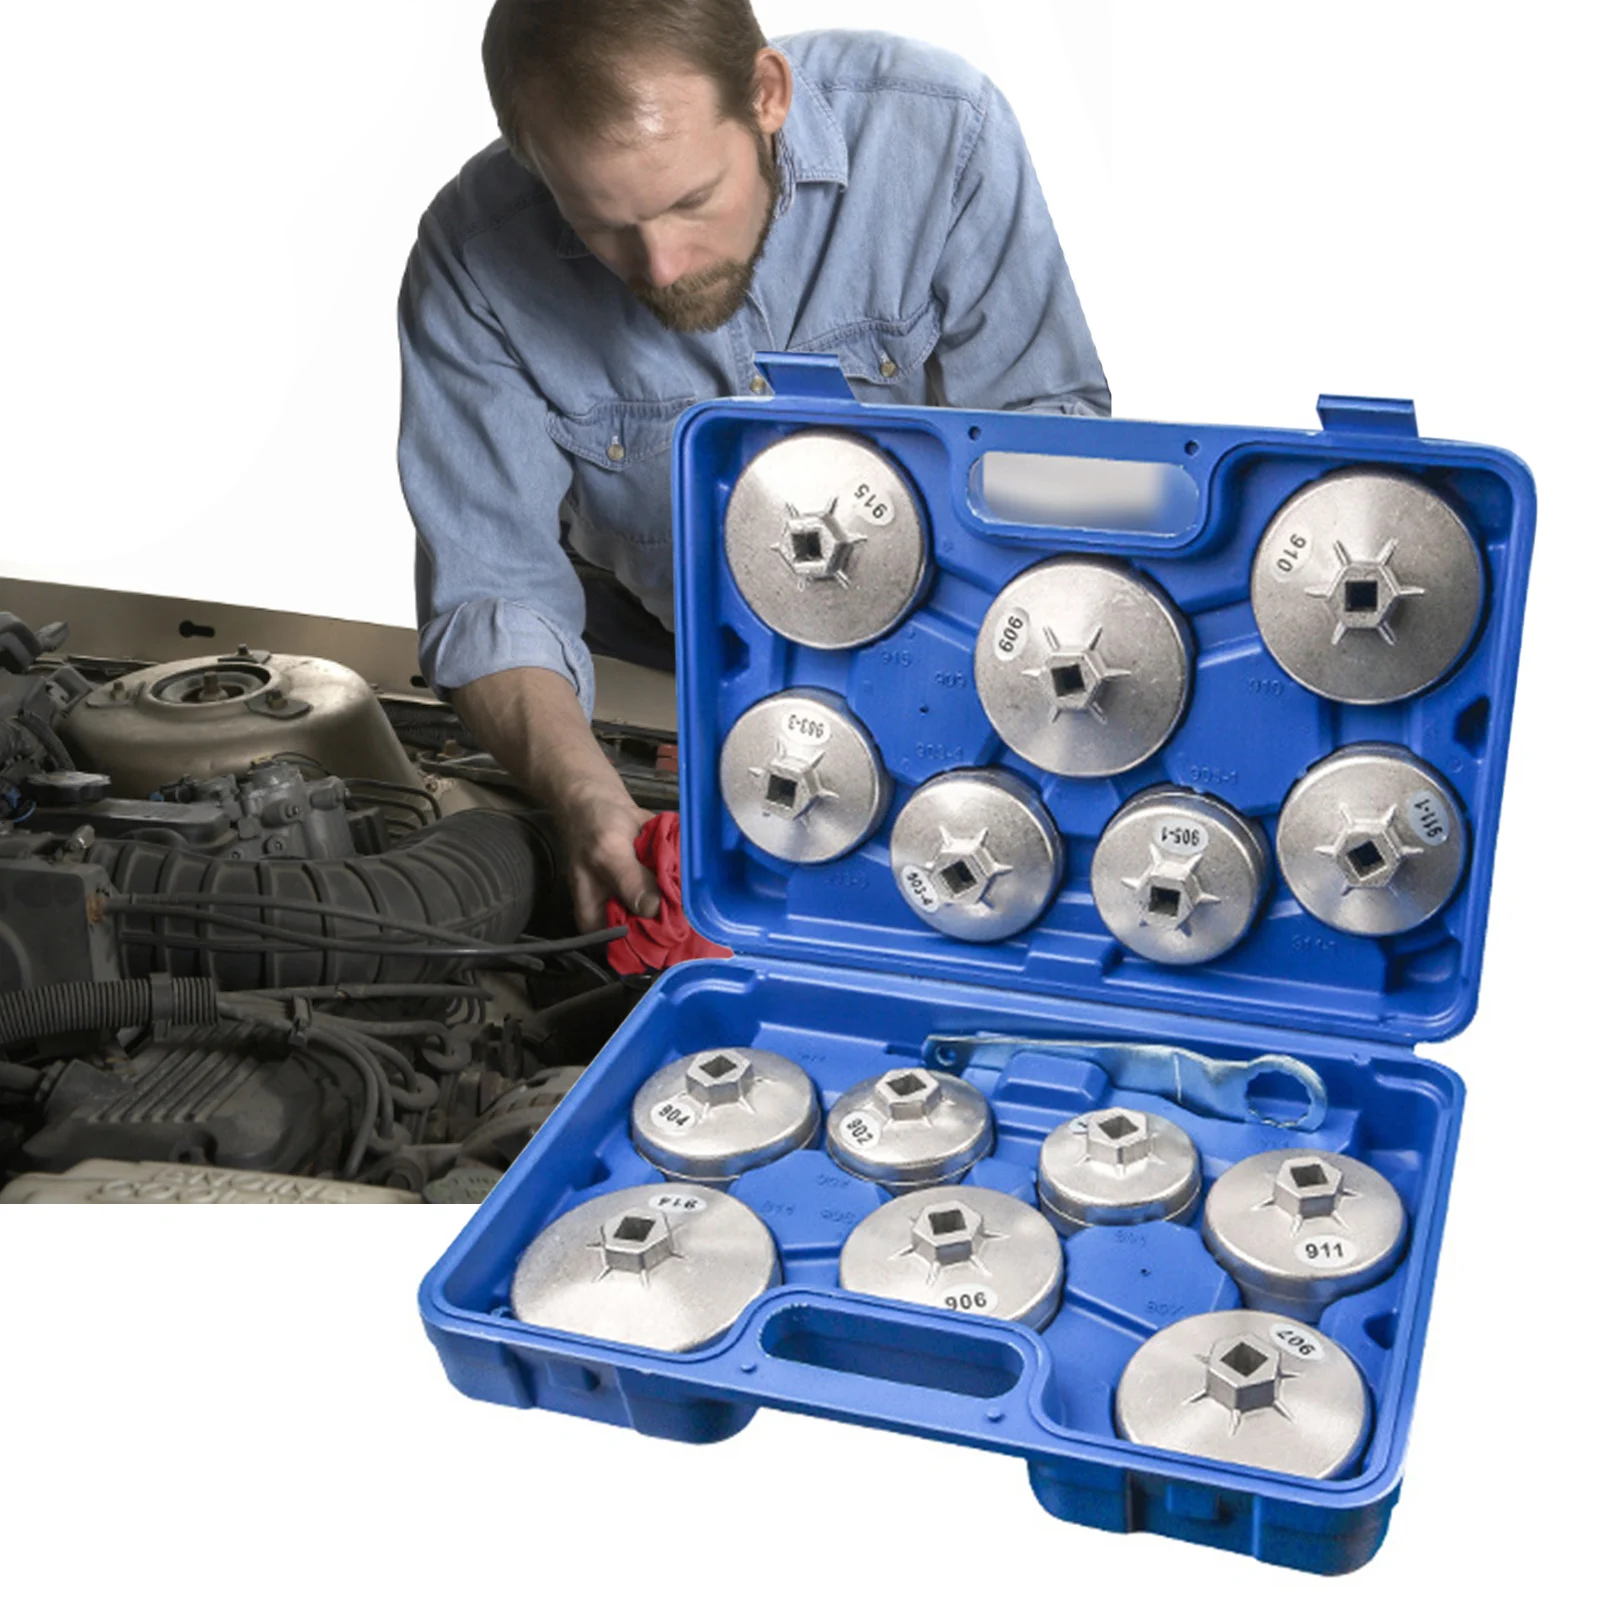 Engine Filter Sleeve Tool Set 15 Piece Socket Set Tool Kit Removal Tool Set With A Storage Case